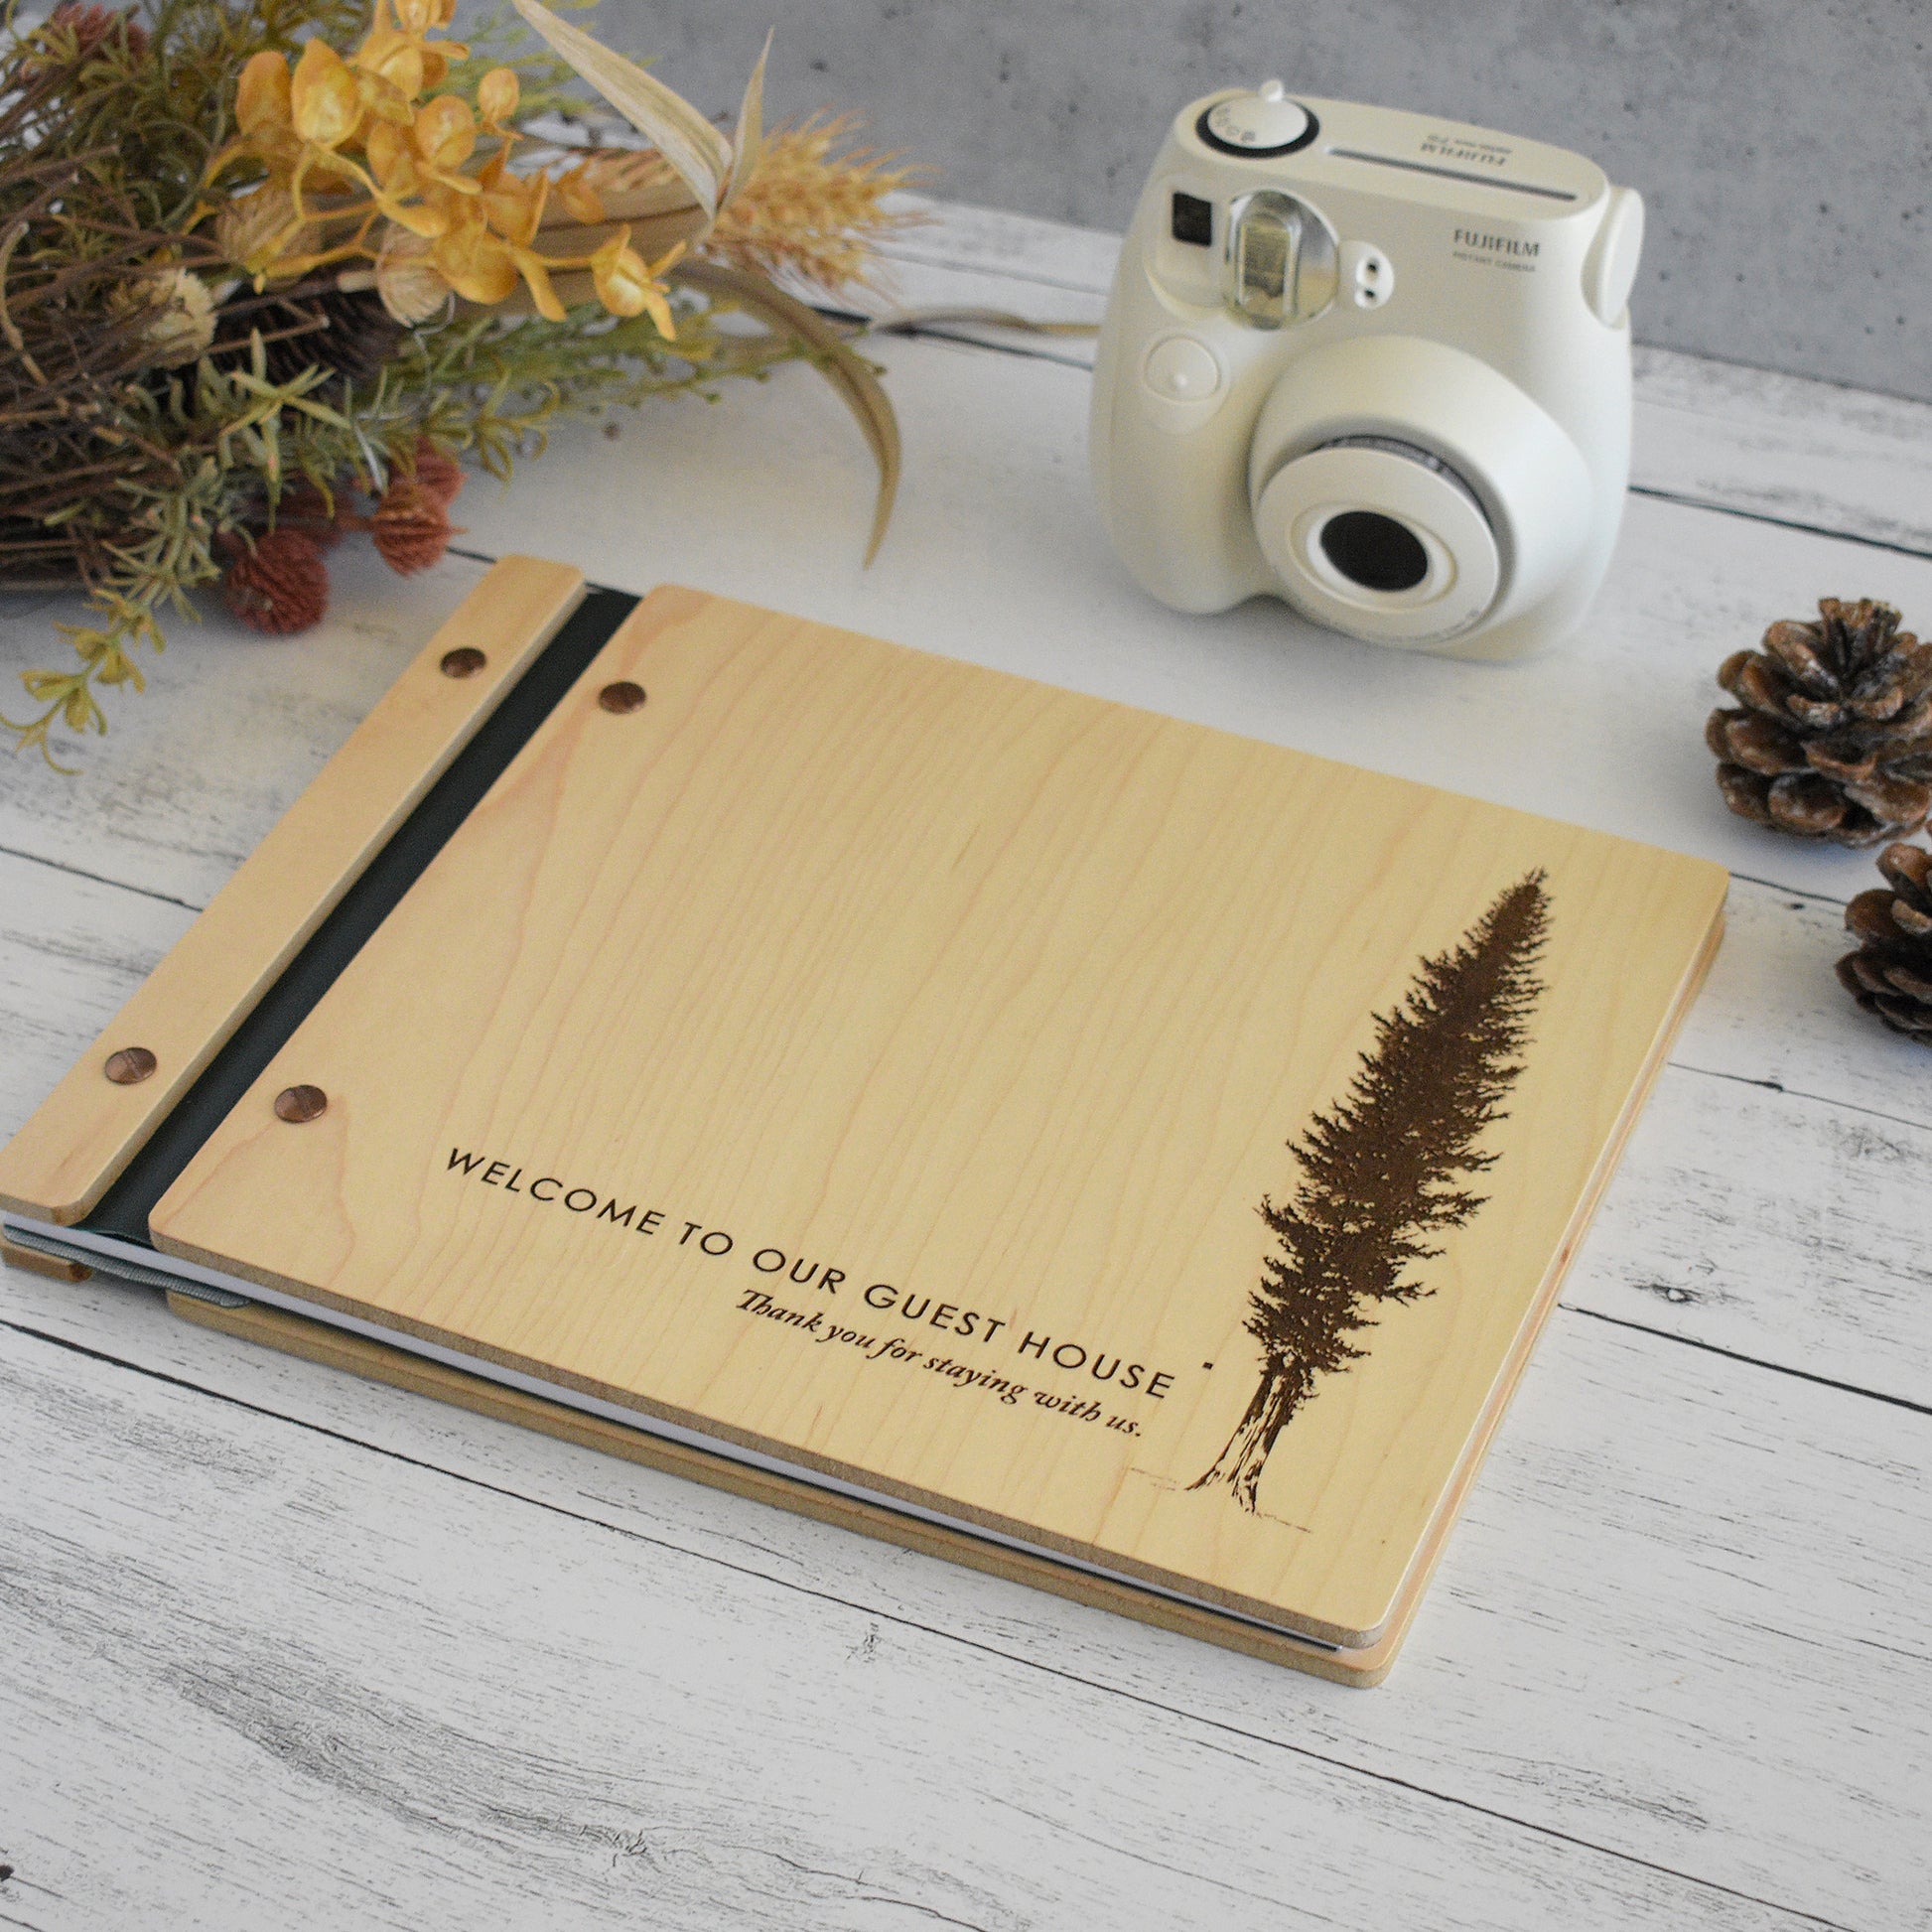 Cabin House Guest Book (hardback) , Comments Book, Guest Book to Sign, Vacation Home, Holiday Home, Visitors Comment Book [Book]